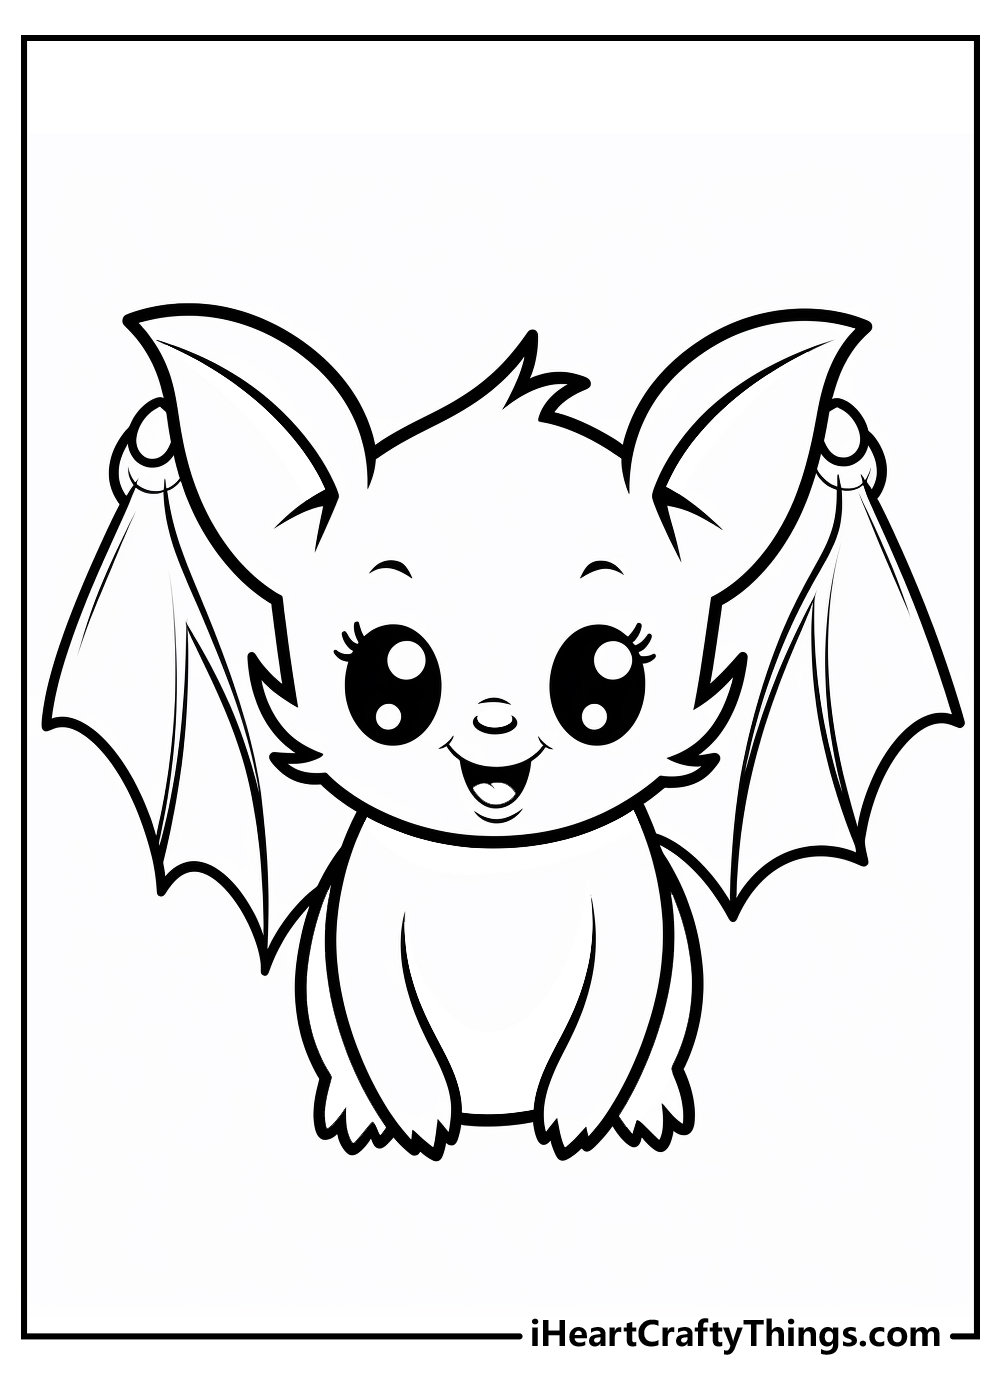 black-and-white bat coloring pages